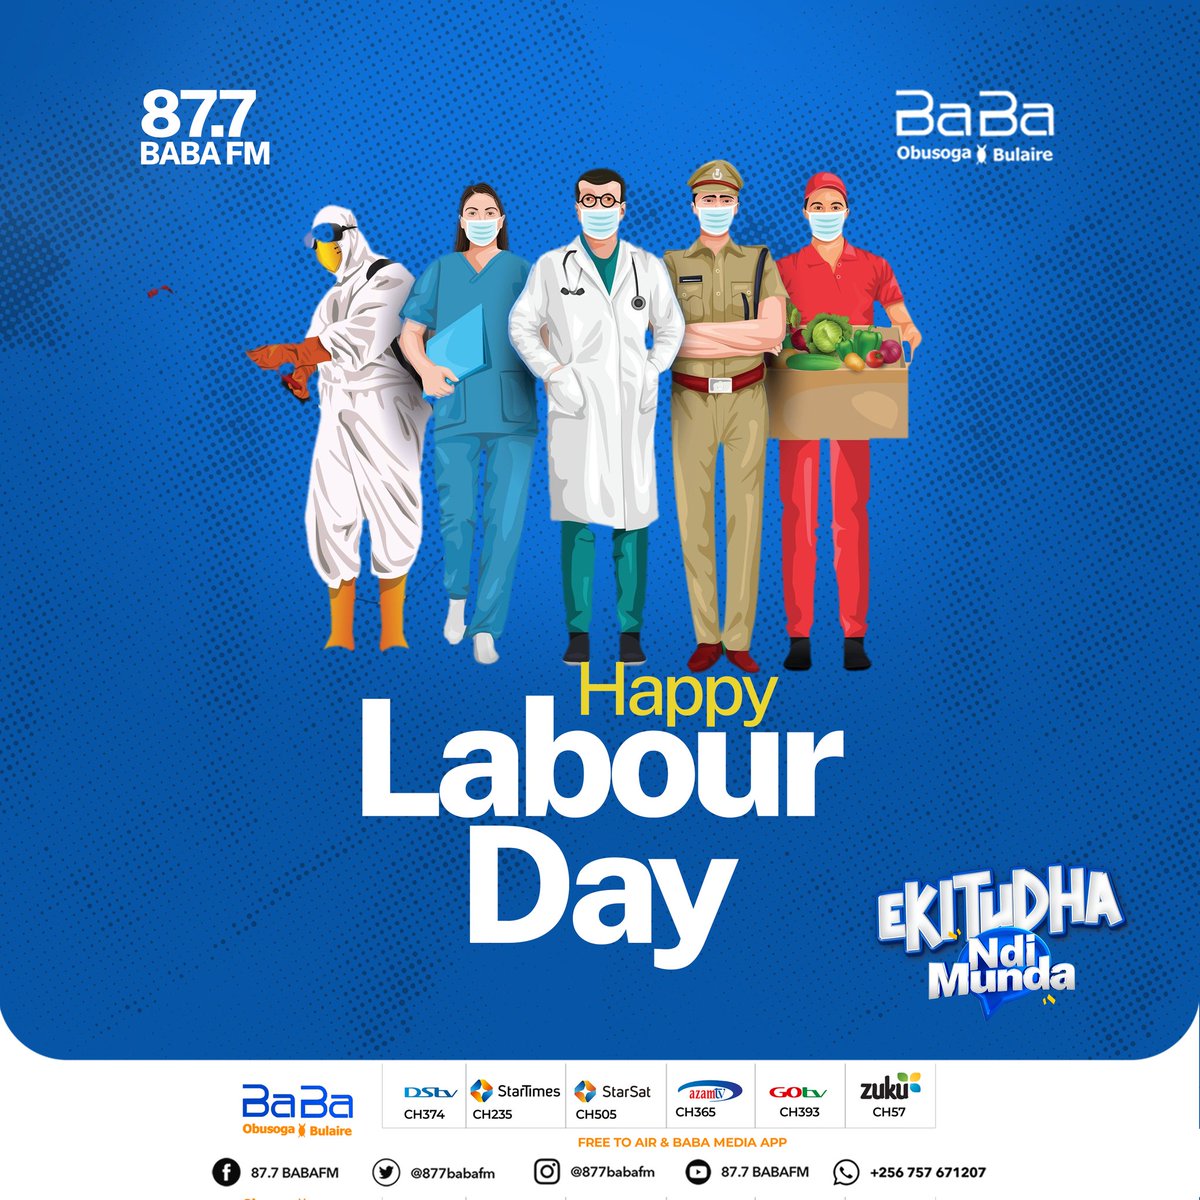 On this special day, we take this opportunity to send our appreciation and respect to the workers of every field for your dedication and efforts. 🙏 Happy #LaborDay #Ekitudha #NdiMunda